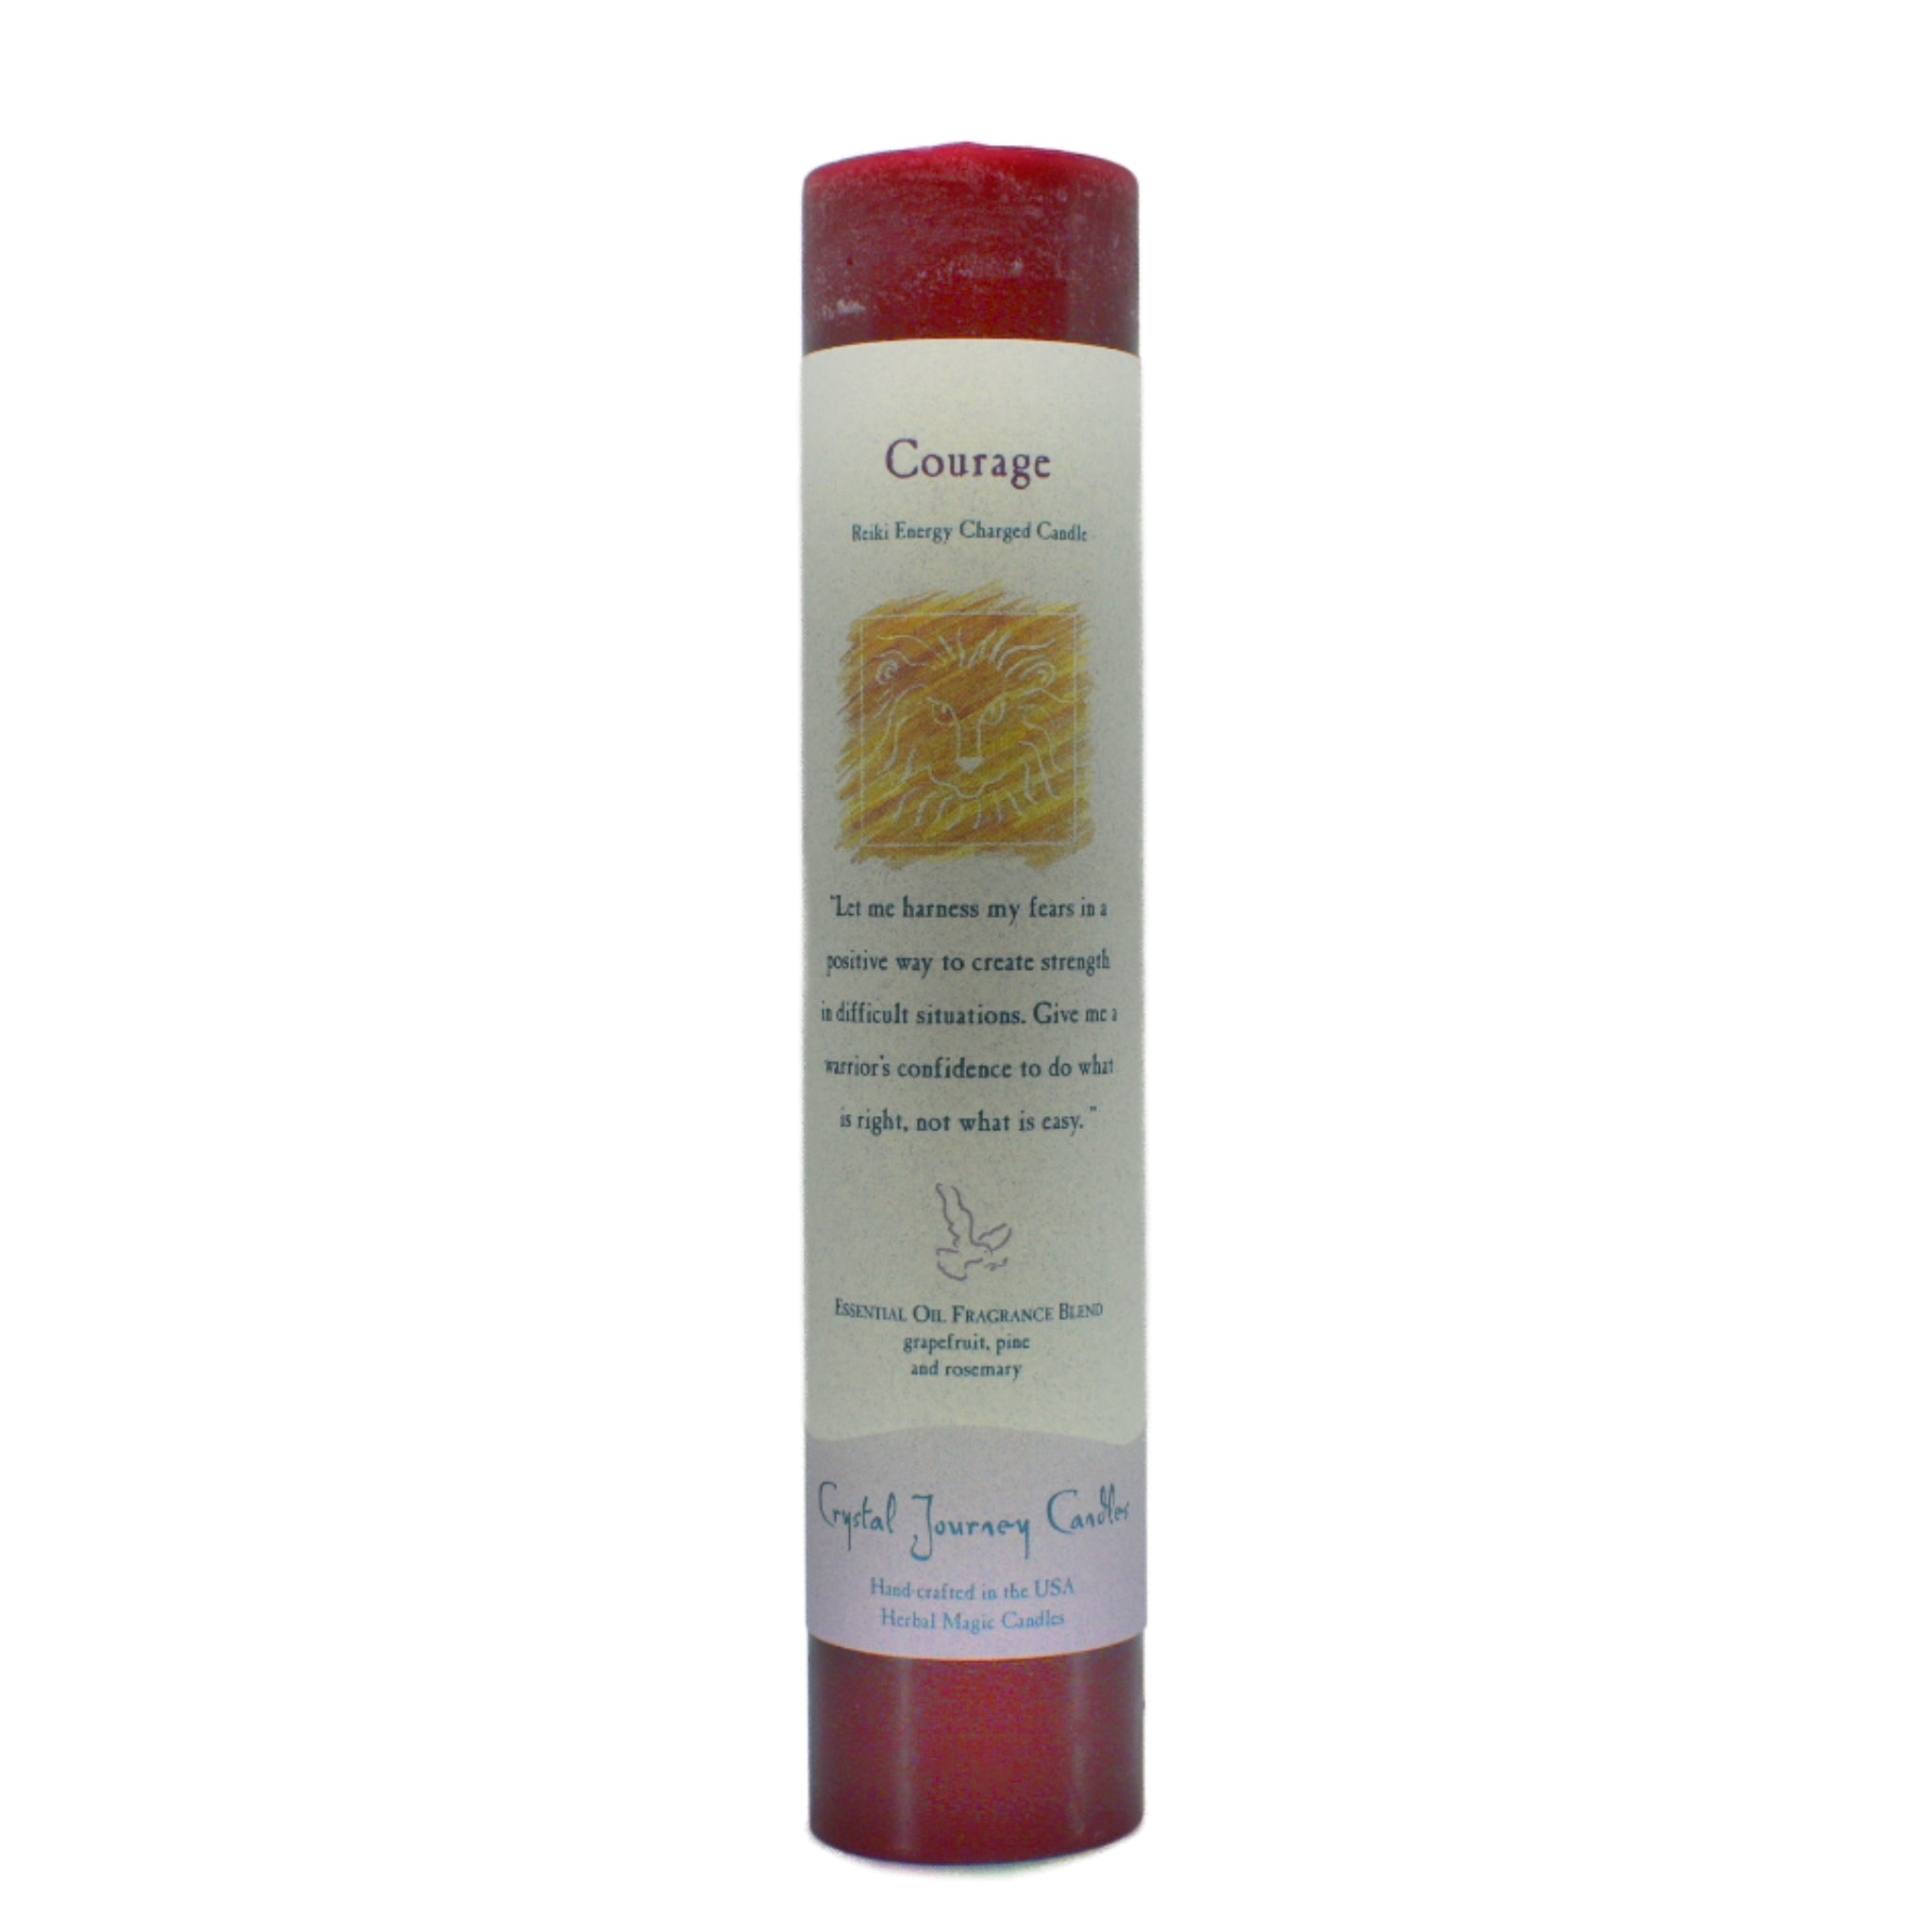 Courage Pillar Candle.  Red candle with grapefruit, pine and rosemary essential oils.  Use this candle to create strength in difficult situations, confidence to do what is right and not easy.